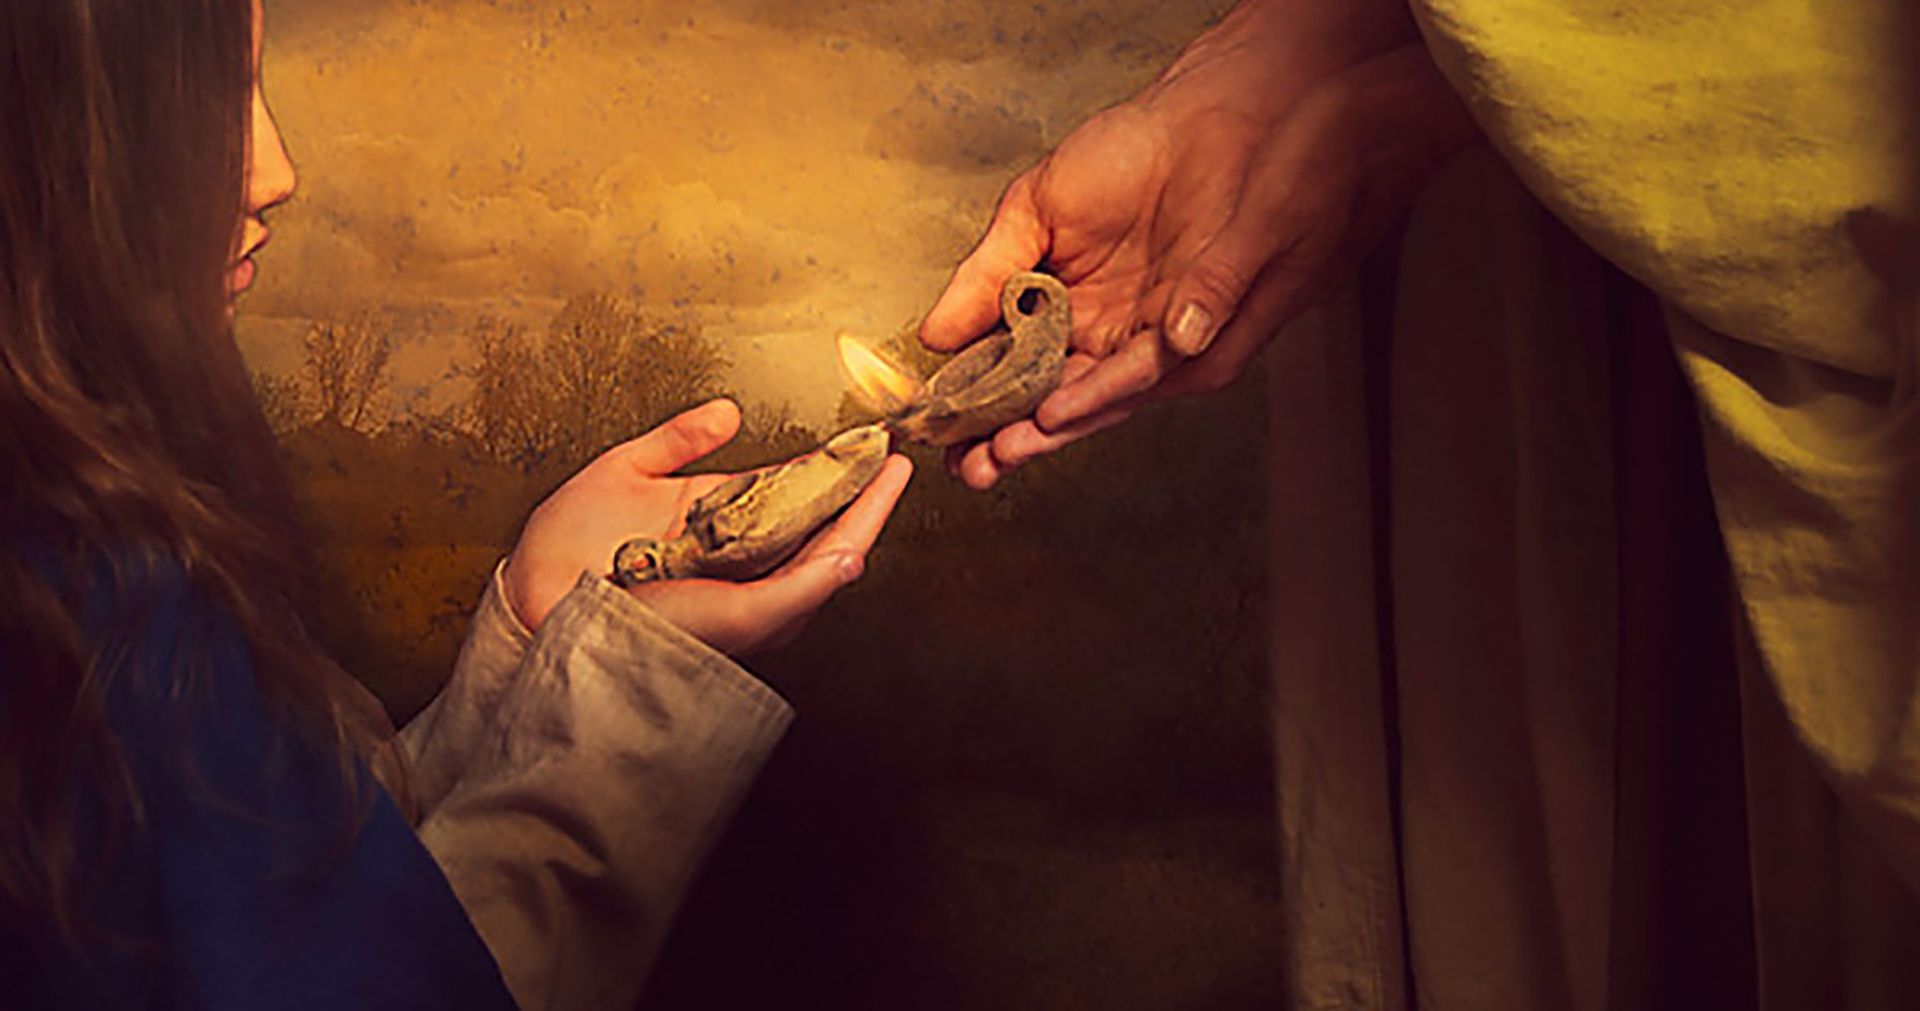 Photographic illustration of the hands of Jesus Christ holding an oil lamp to light another lamp held by a woman kneeling before him.